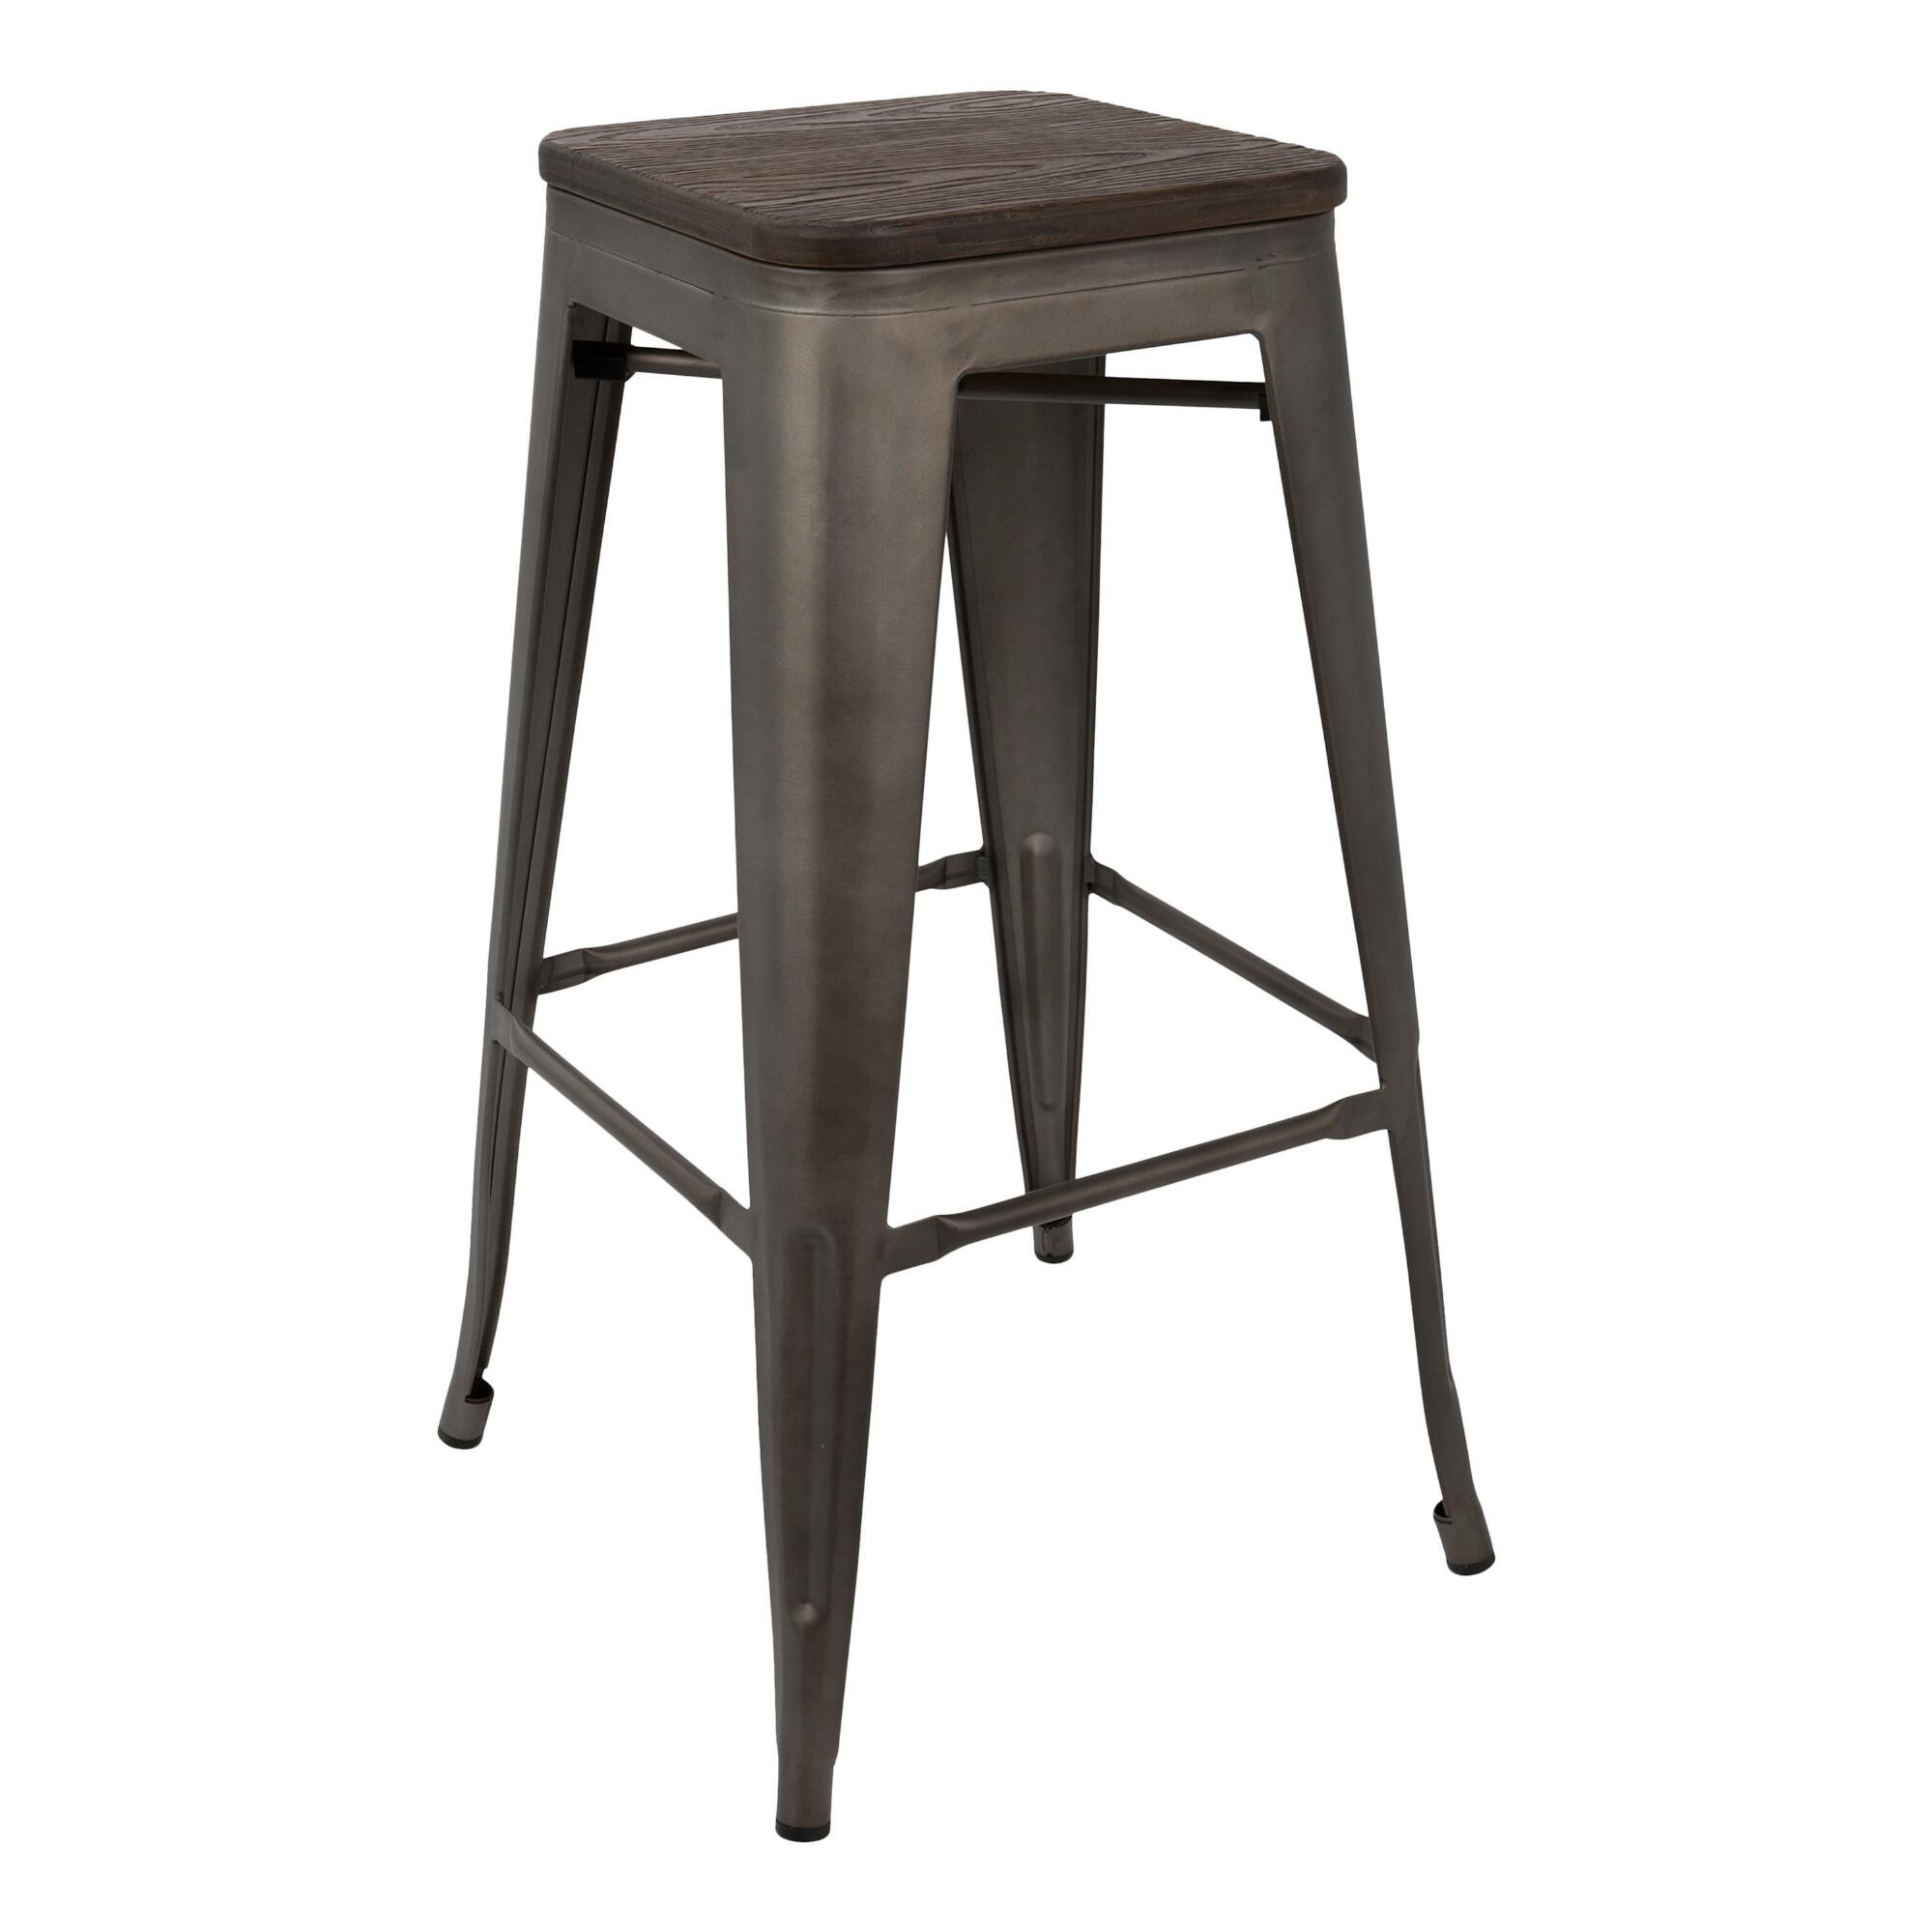 Metal And Wood Backless Arwen Barstools Set Of 2 by World Market